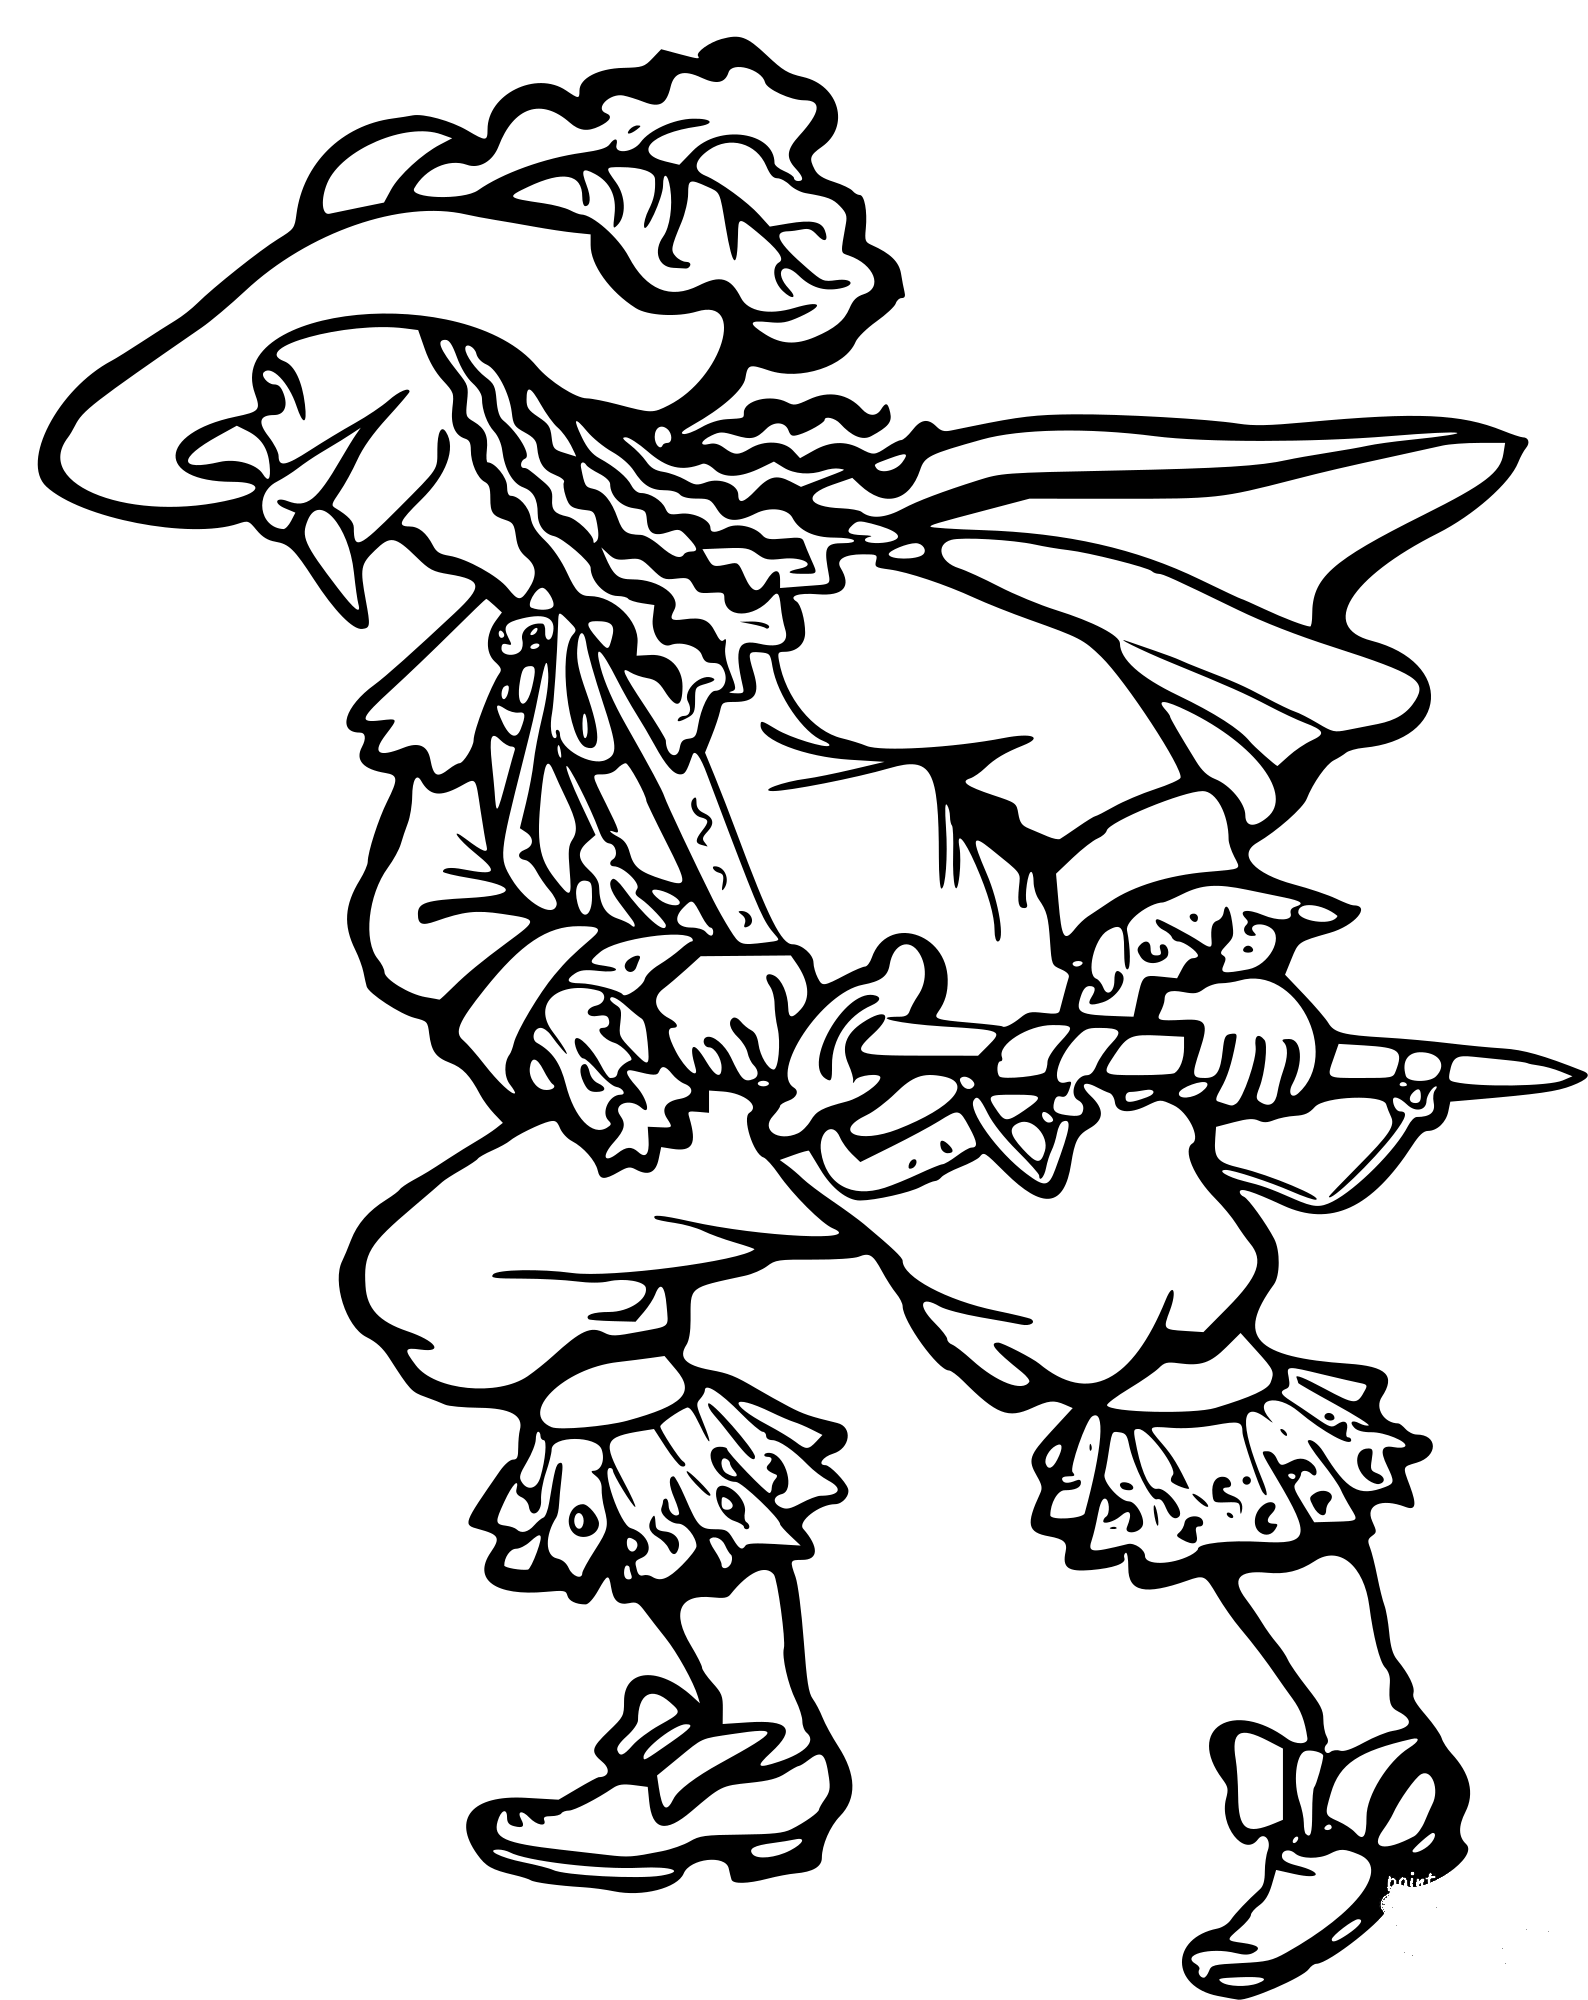 Vintage Comic Character - Musketeer coloring page - ColouringPages